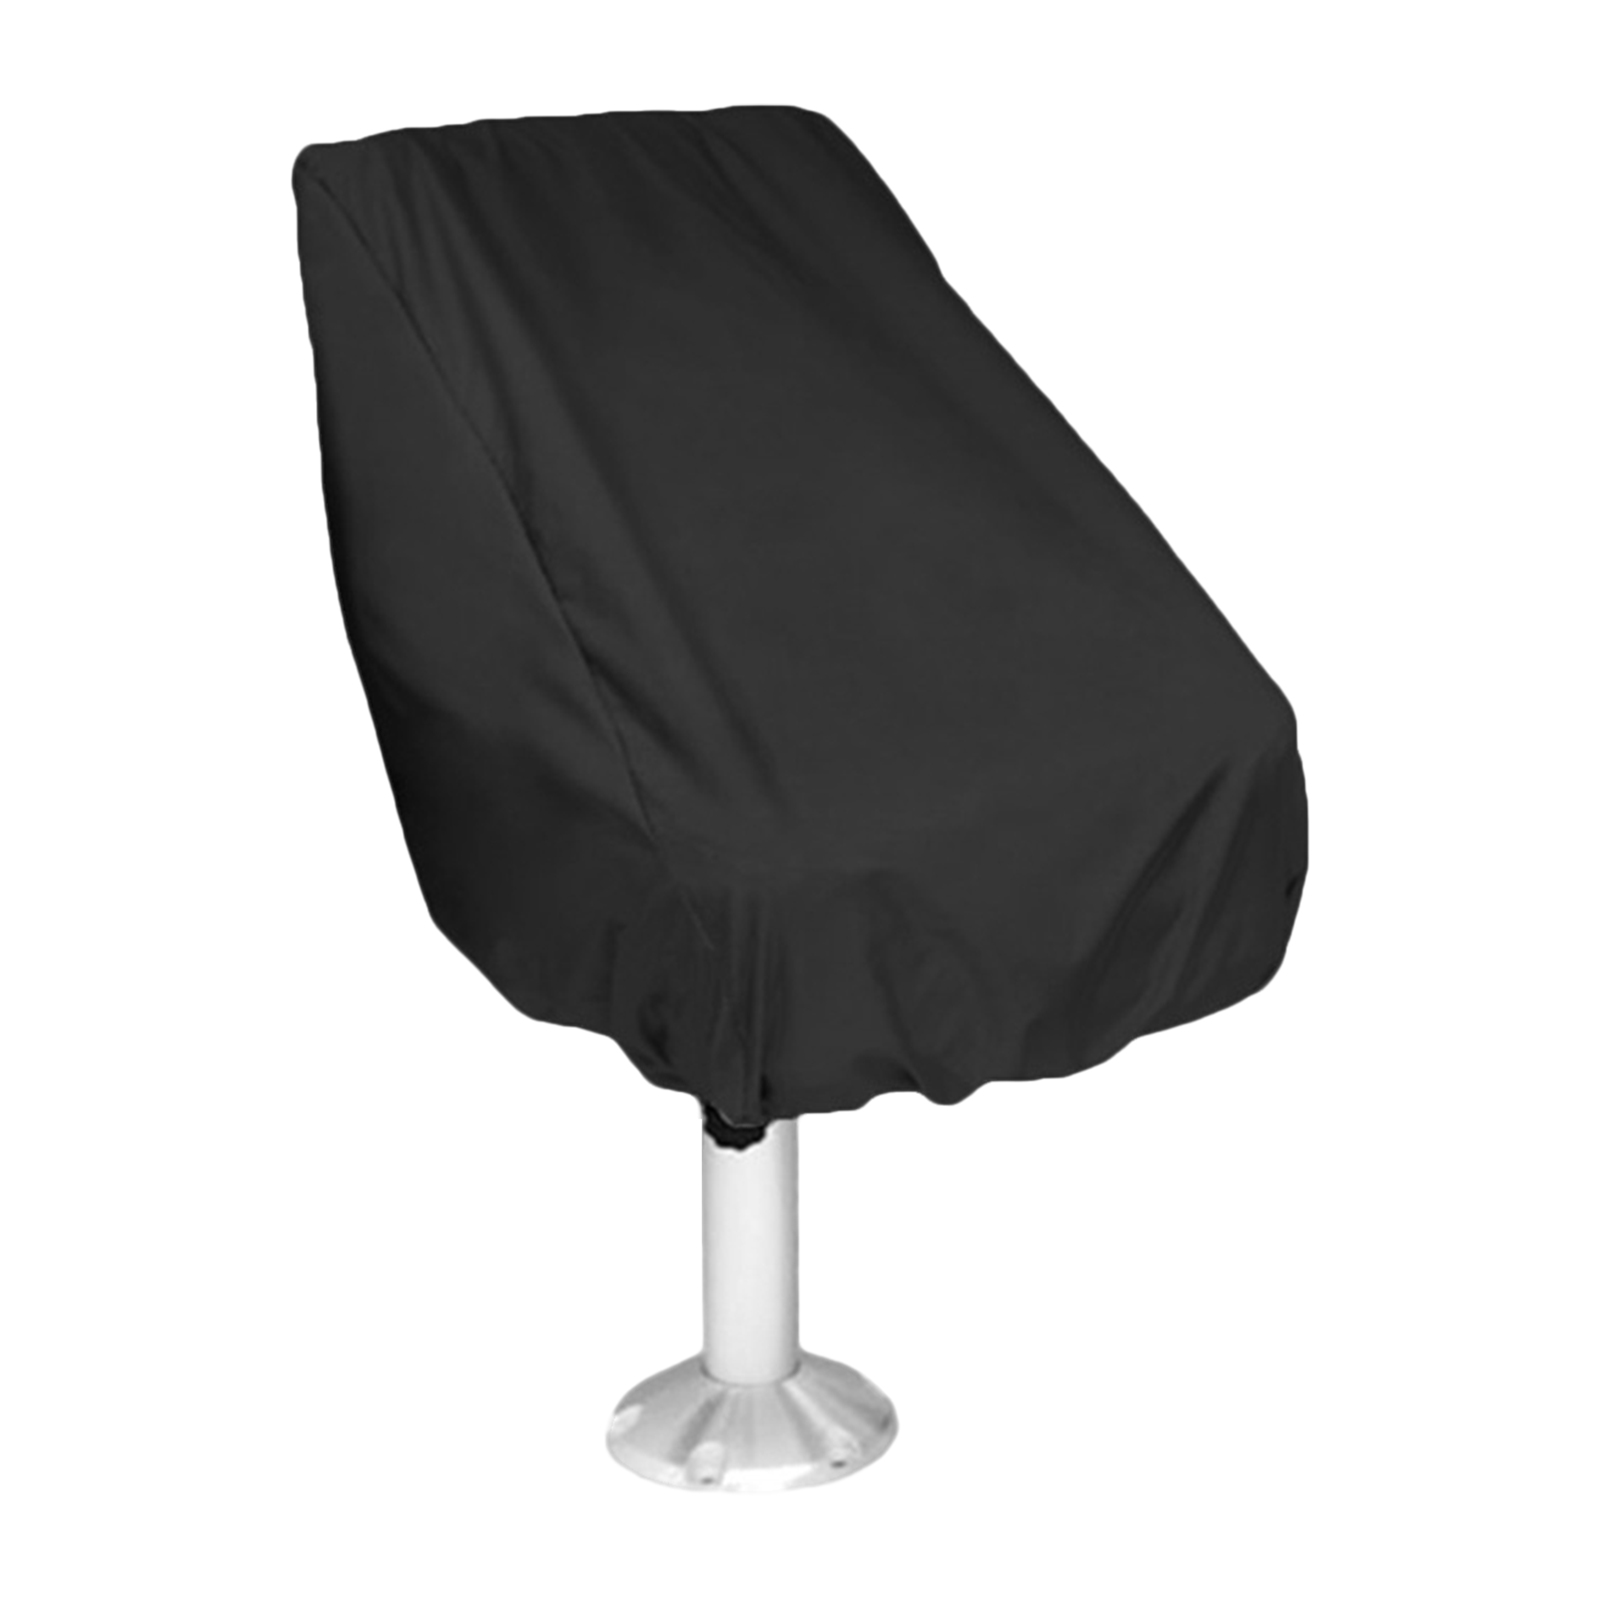 Tomshoo Boat Seat Cover, UV Blocking & Waterproof, Protects Against Wind, Rain, and Dust - image 1 of 7